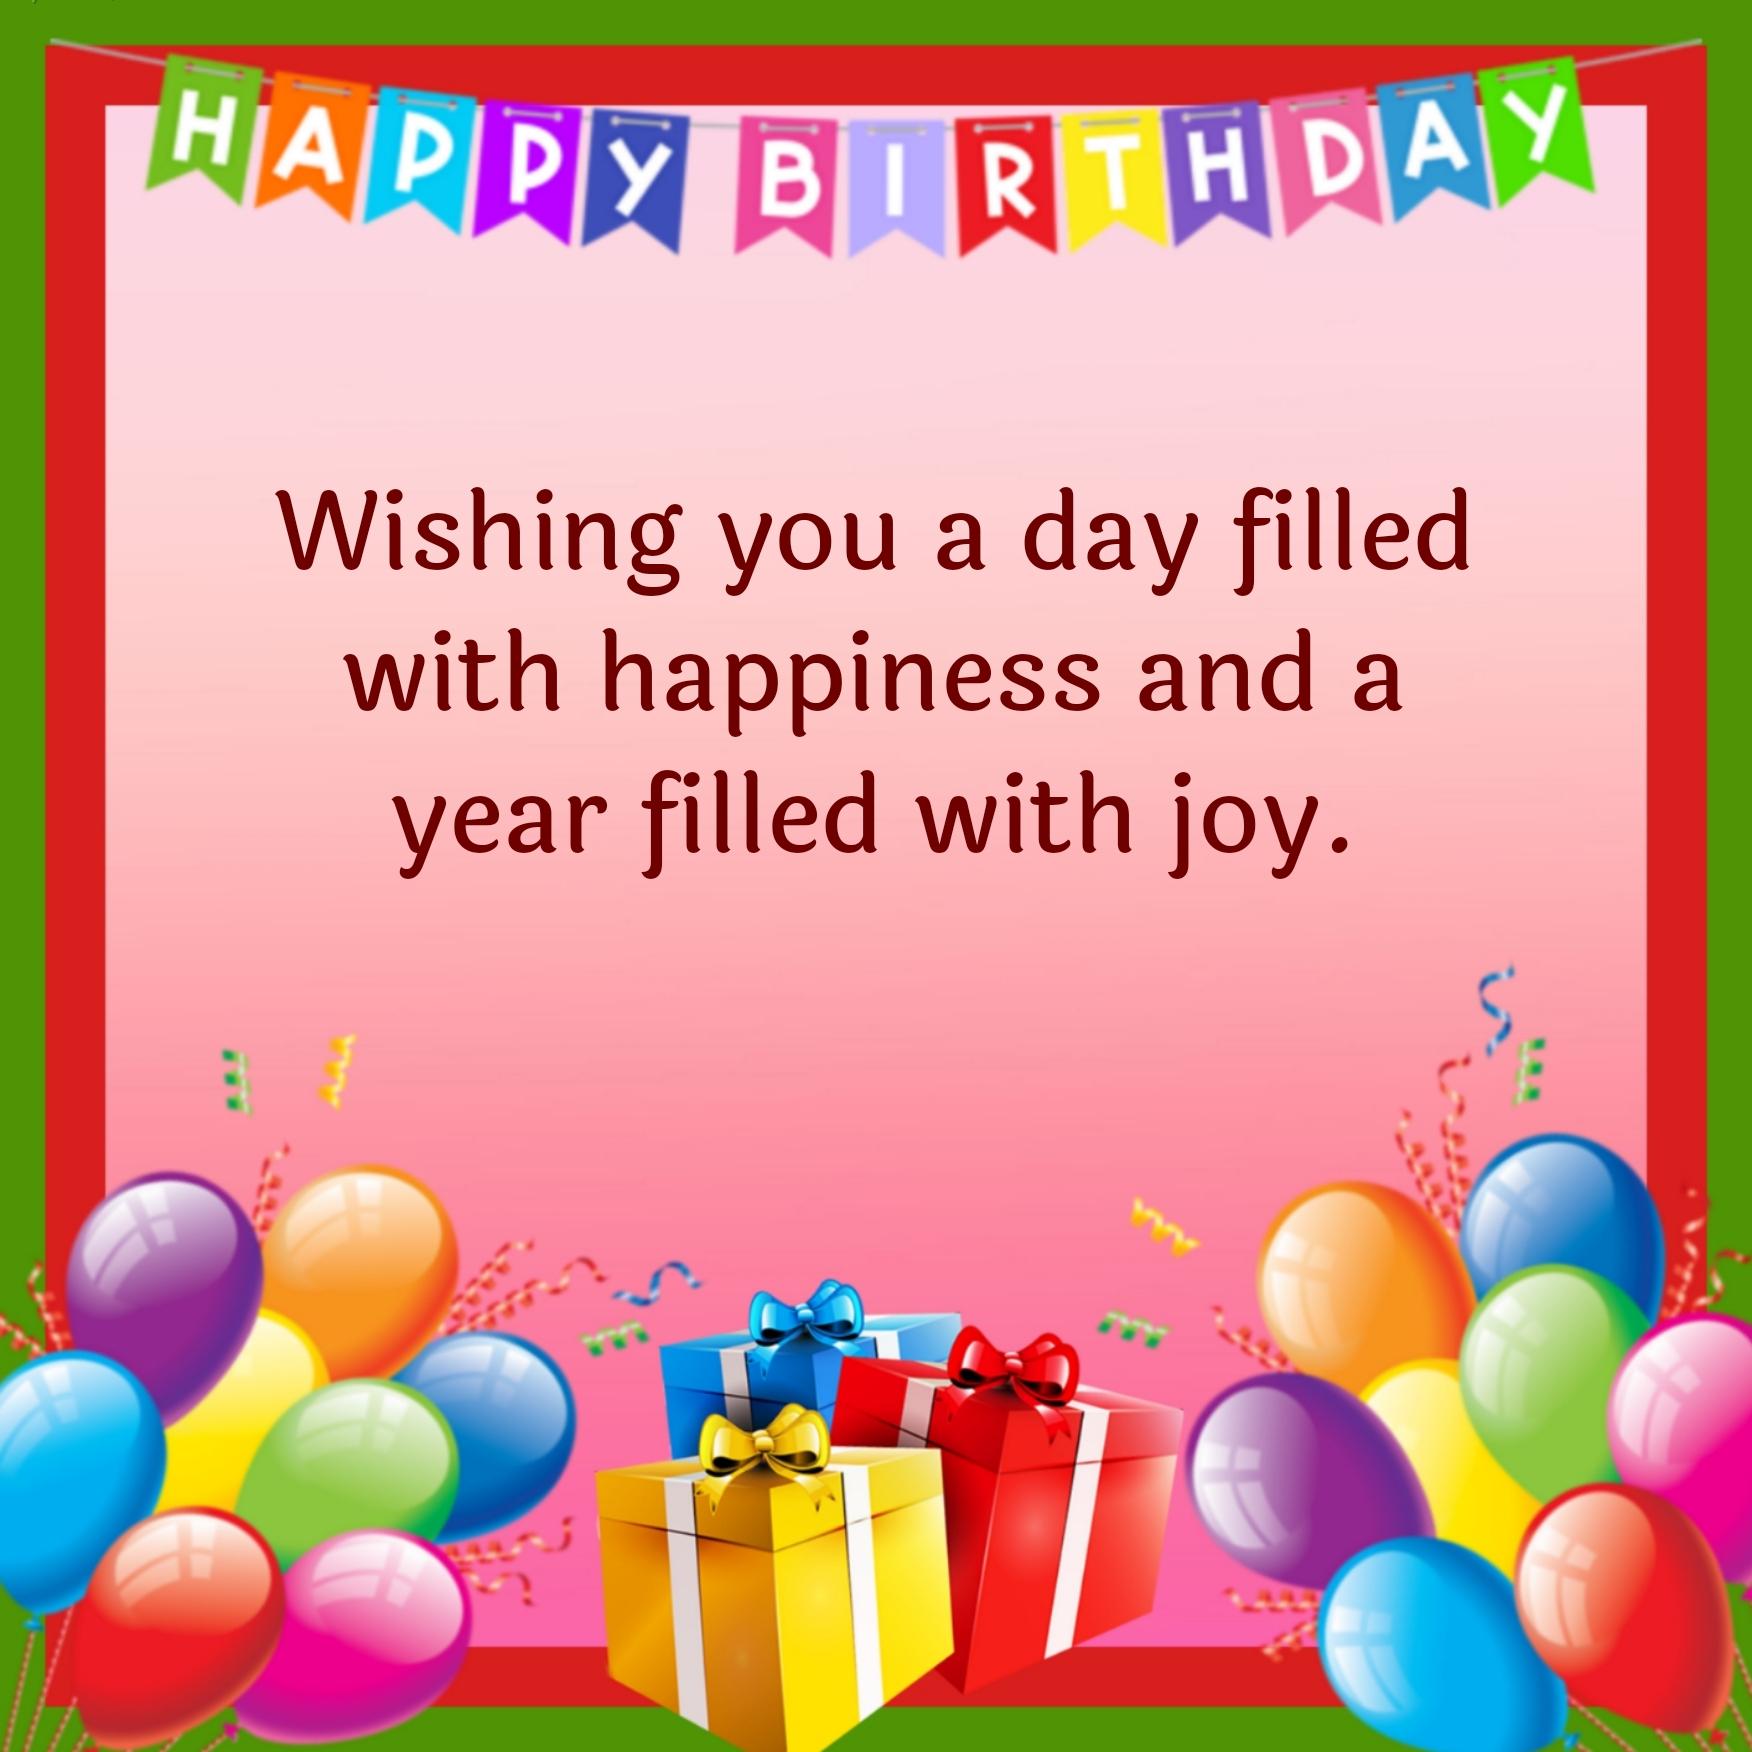 Wishing you a day filled with happiness and a year filled with joy